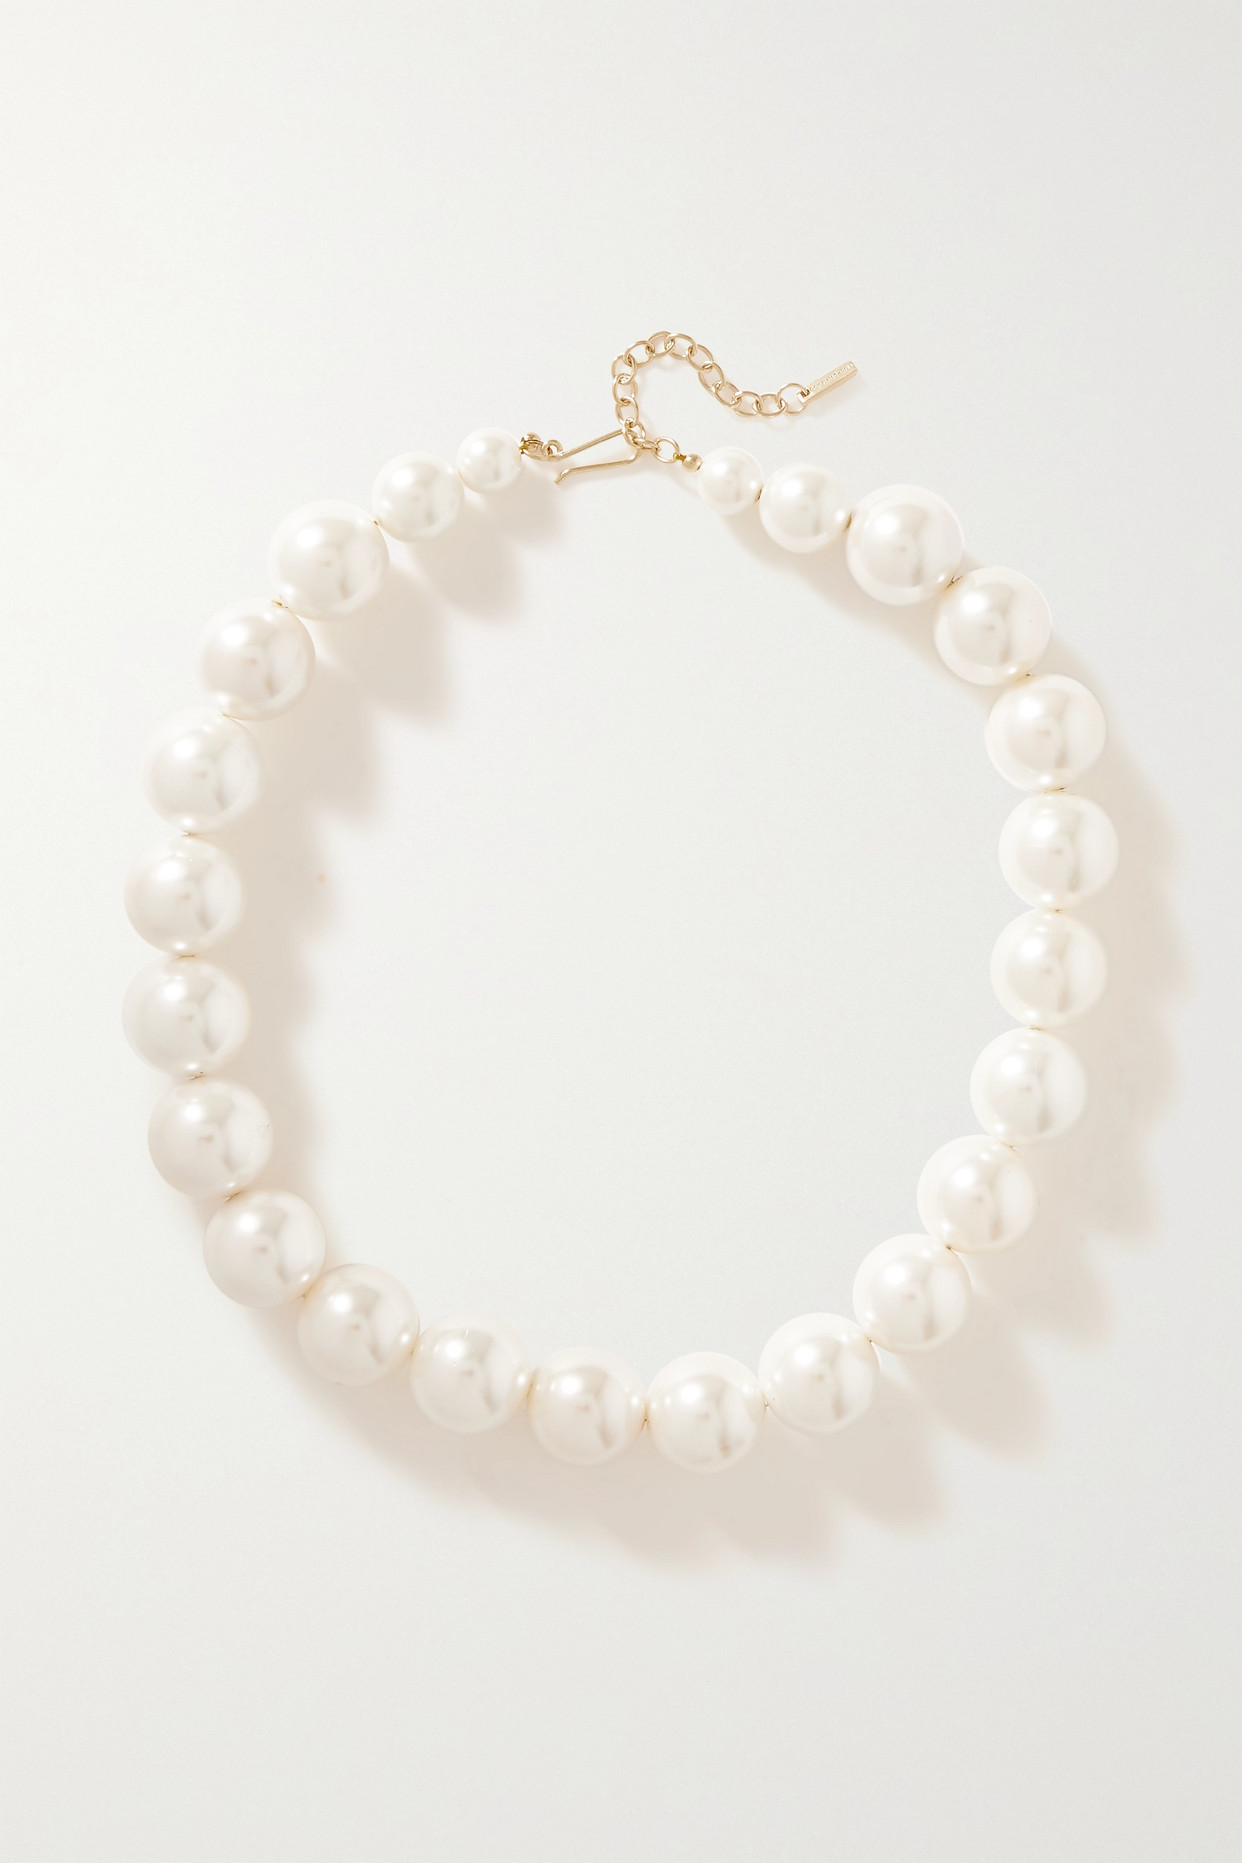 + Net Sustain Gobbled Recycled Gold Vermeil Pearl Necklace